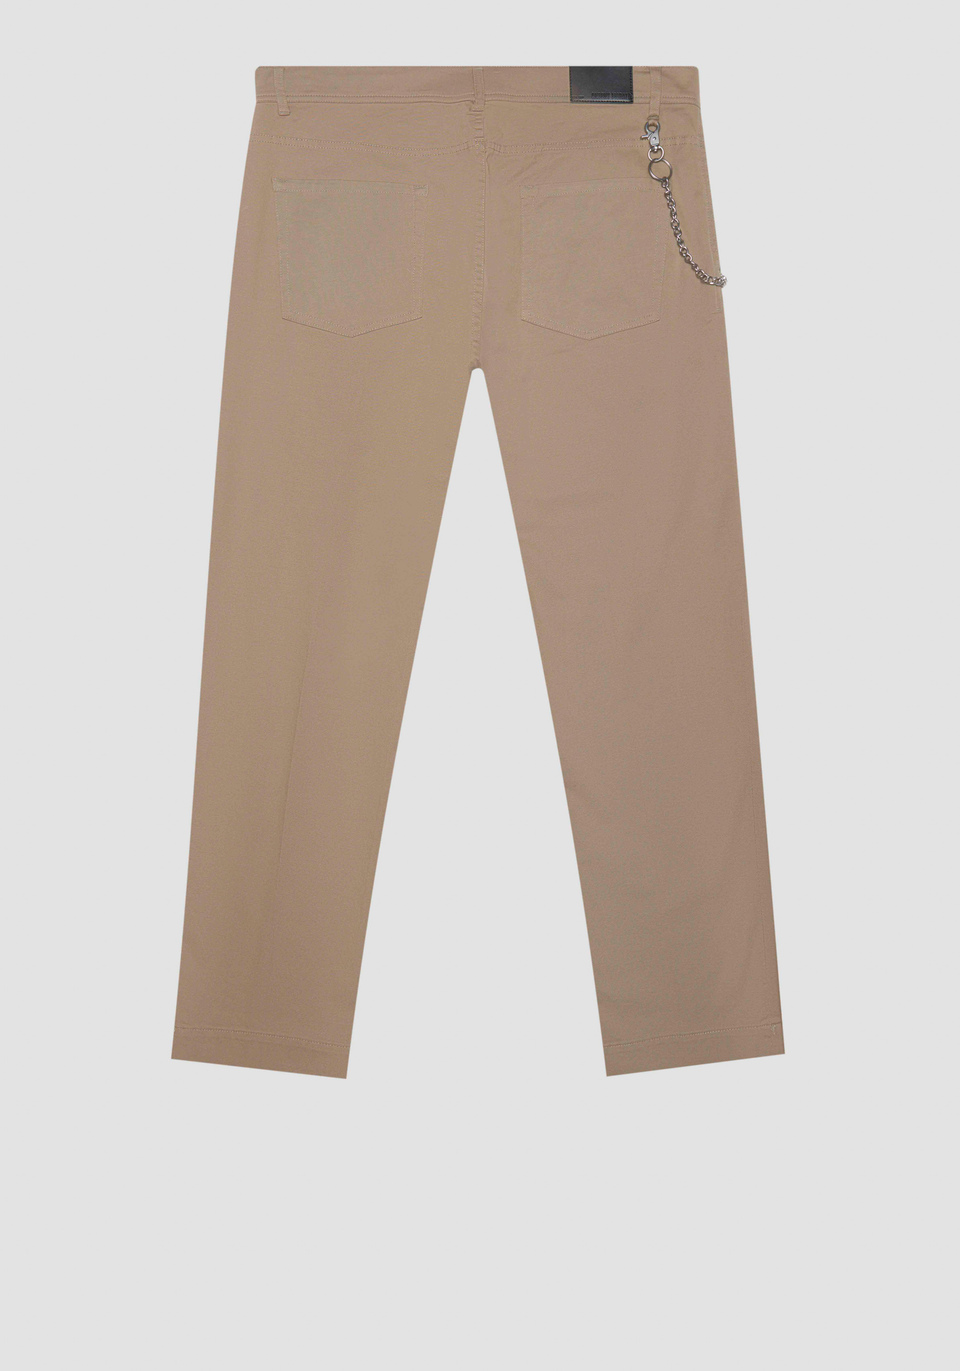 "OLIVER" SLIM FIT ANKLE LENGTH TROUSERS IN ELASTIC COTTON - Antony Morato Online Shop